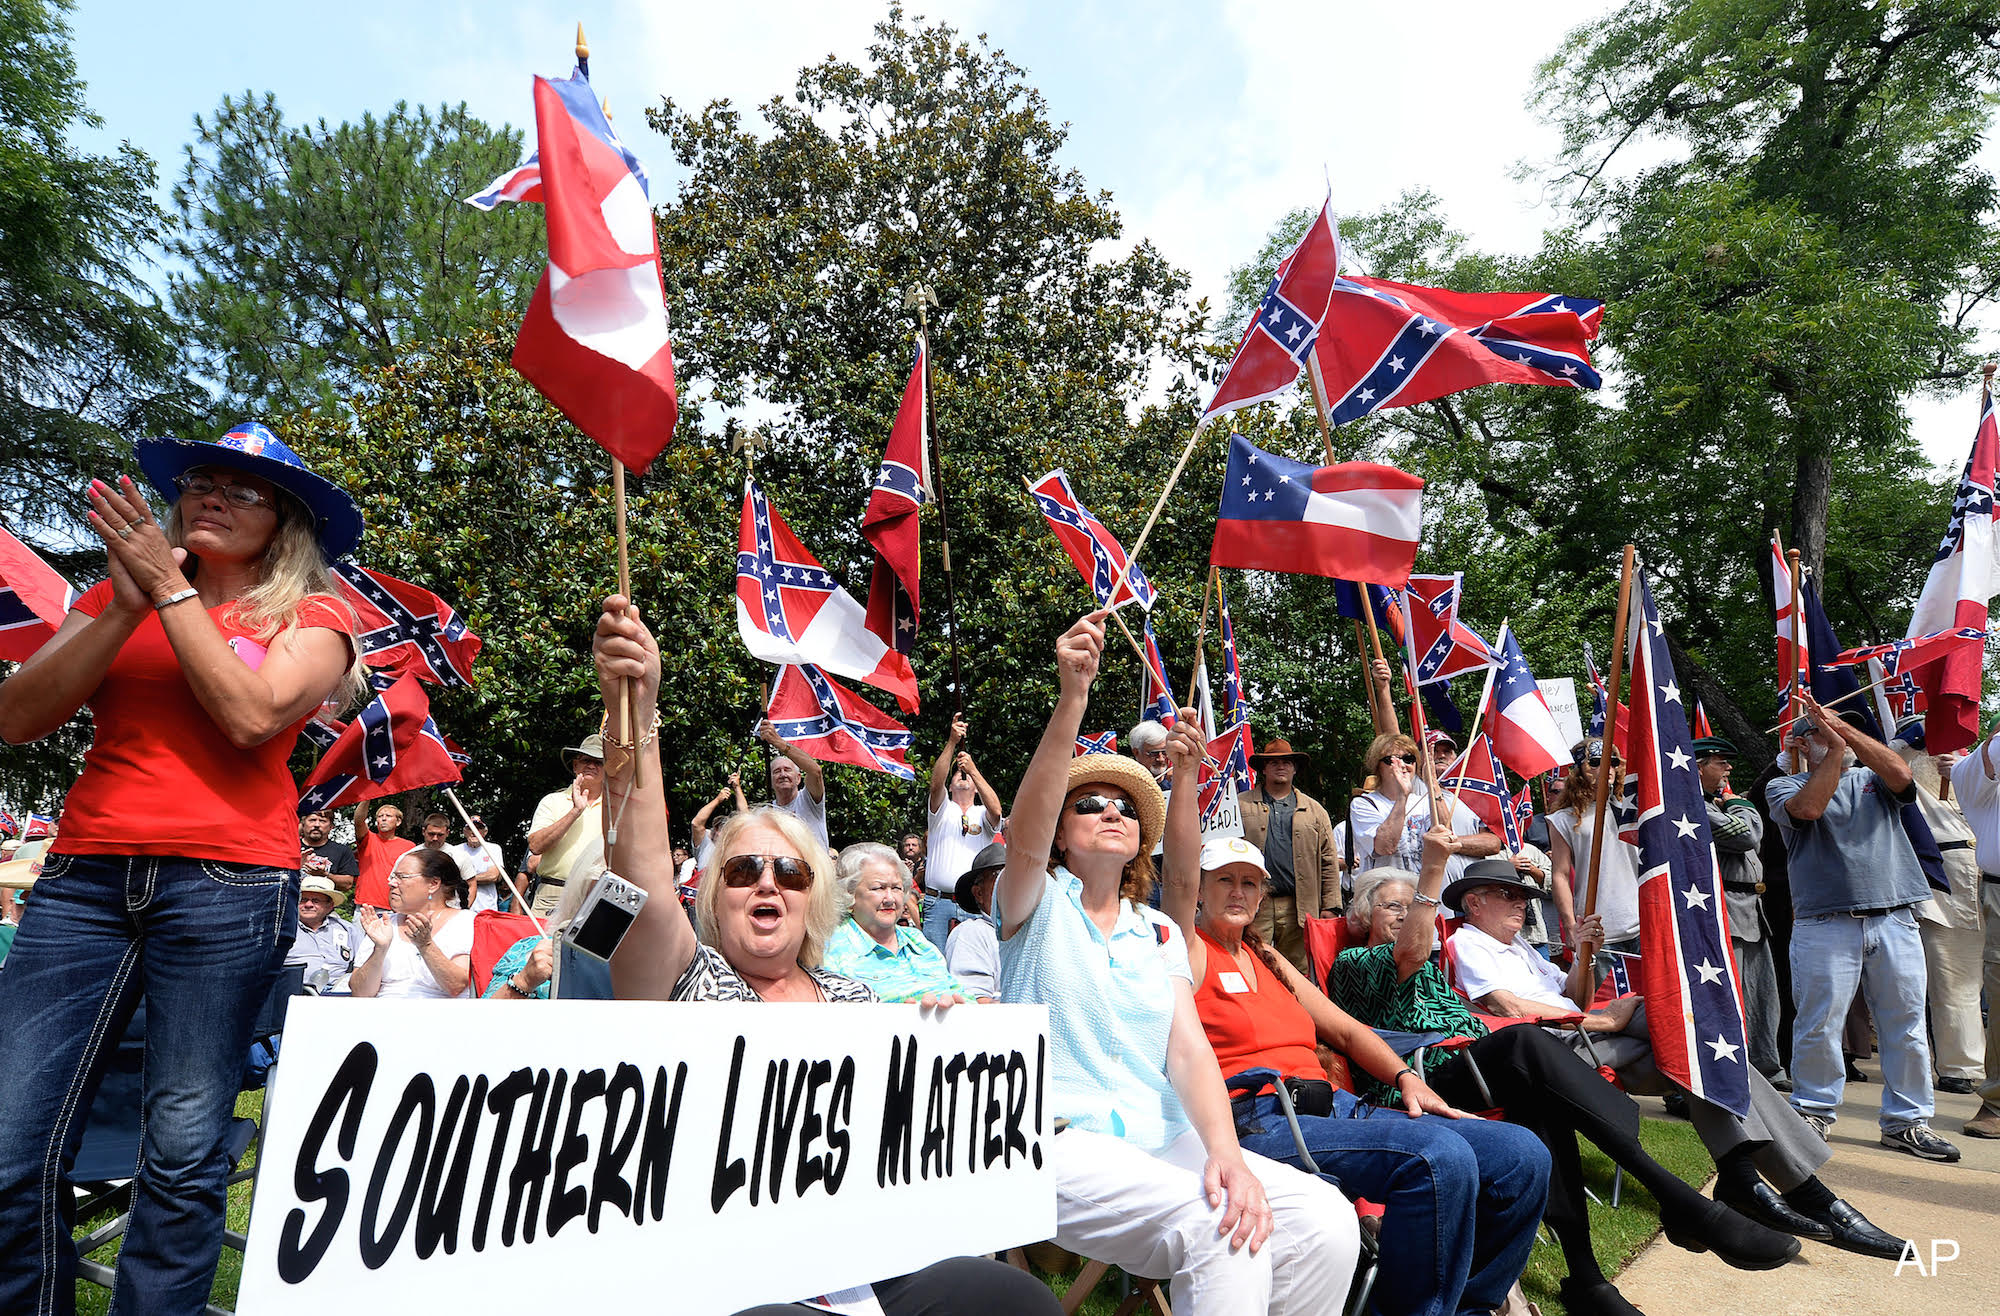 Photo: Supporters gather for a rally to protest the removal of Confederate flags from the Confederate Memorial Saturday, June 27, 2015, in Montgomery, Ala. Photo courtesy of Julie Bennett/AL.com via AP.